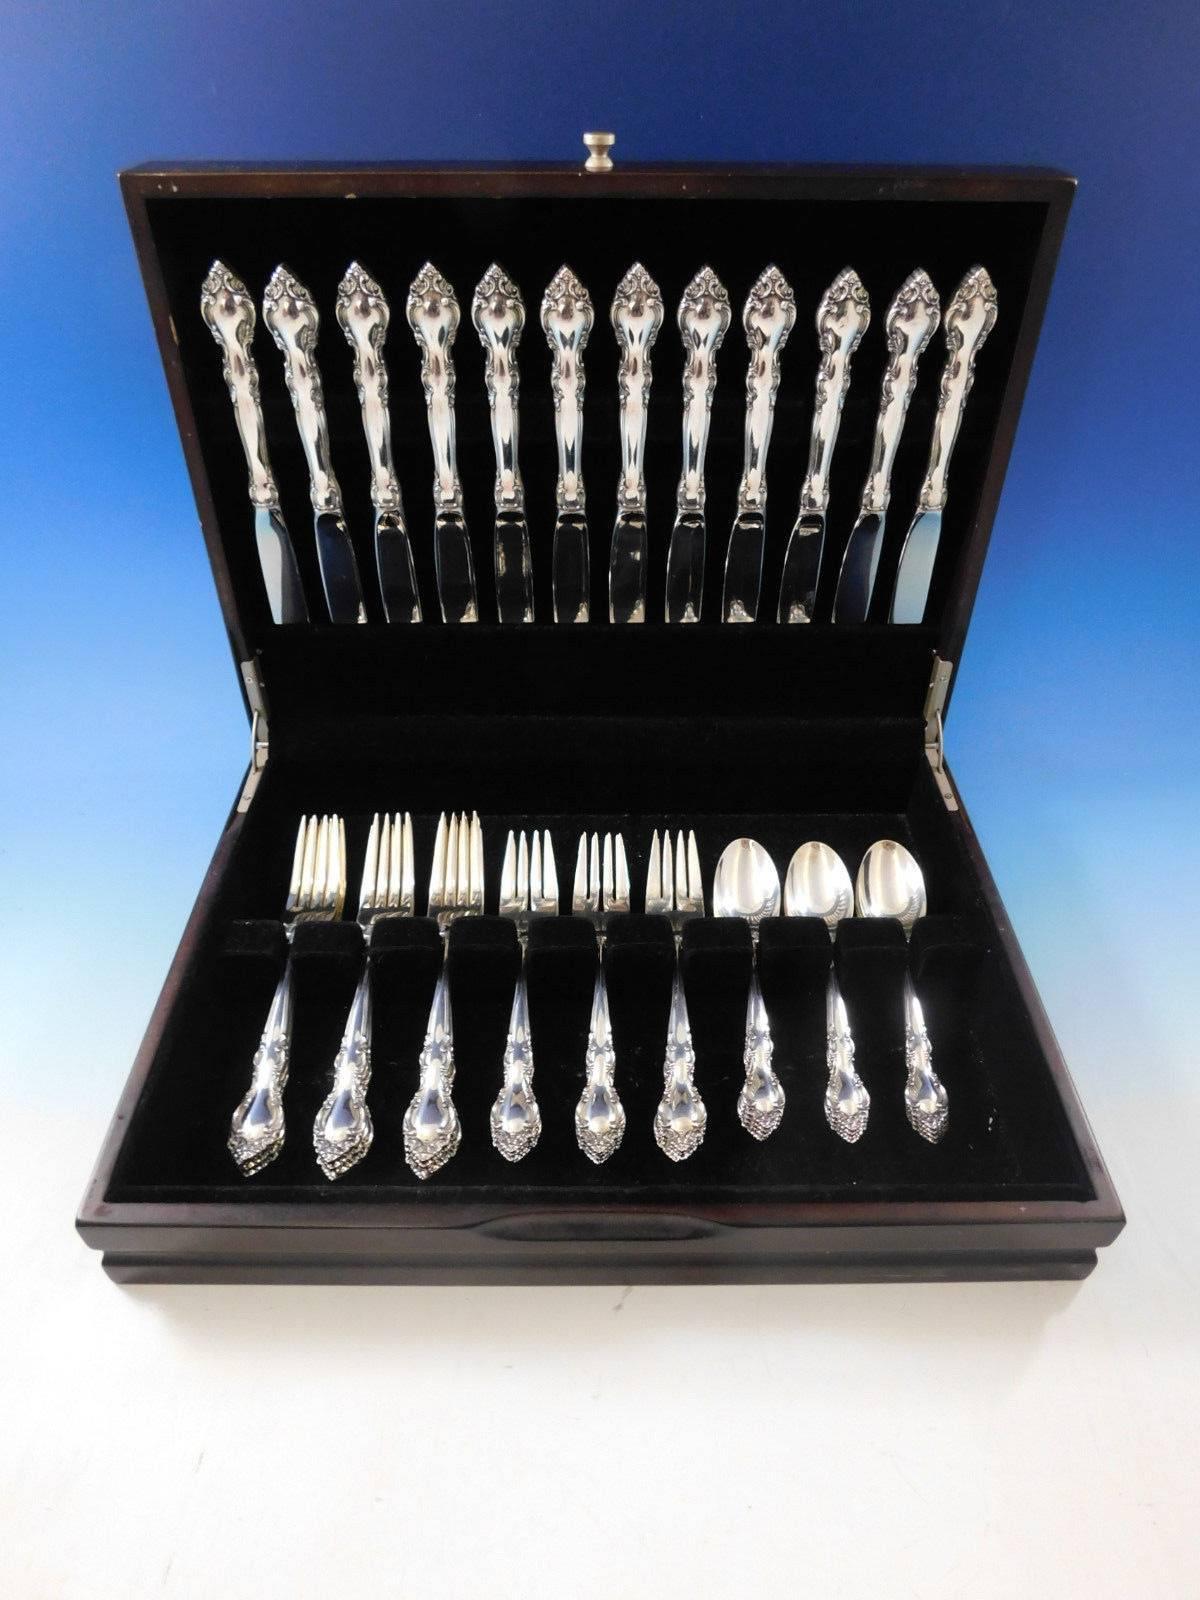 Malvern by Lunt sterling silver flatware set - 48 pieces. This set includes:

12 Knives, 9